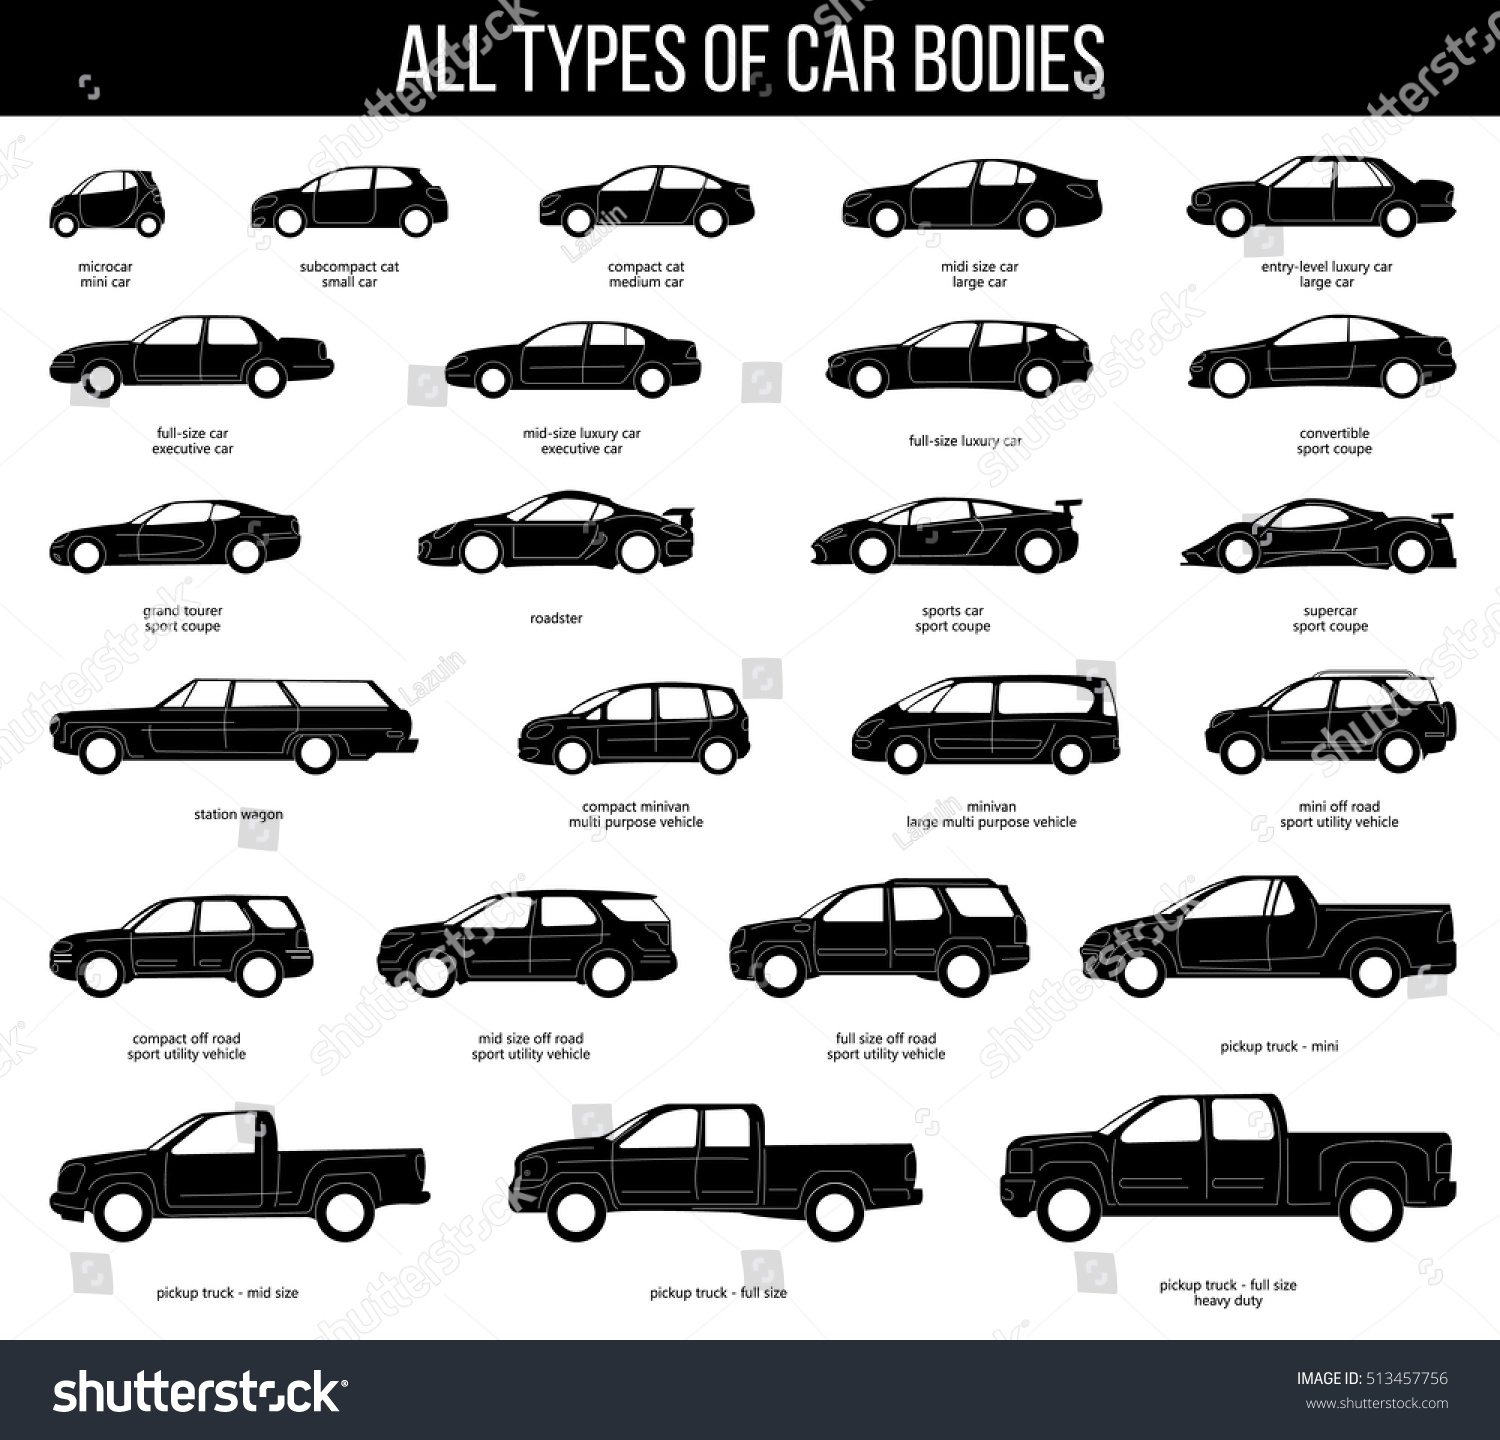 All Types Car Bodies Car Type Stock Vector 513457756  Shutterstock